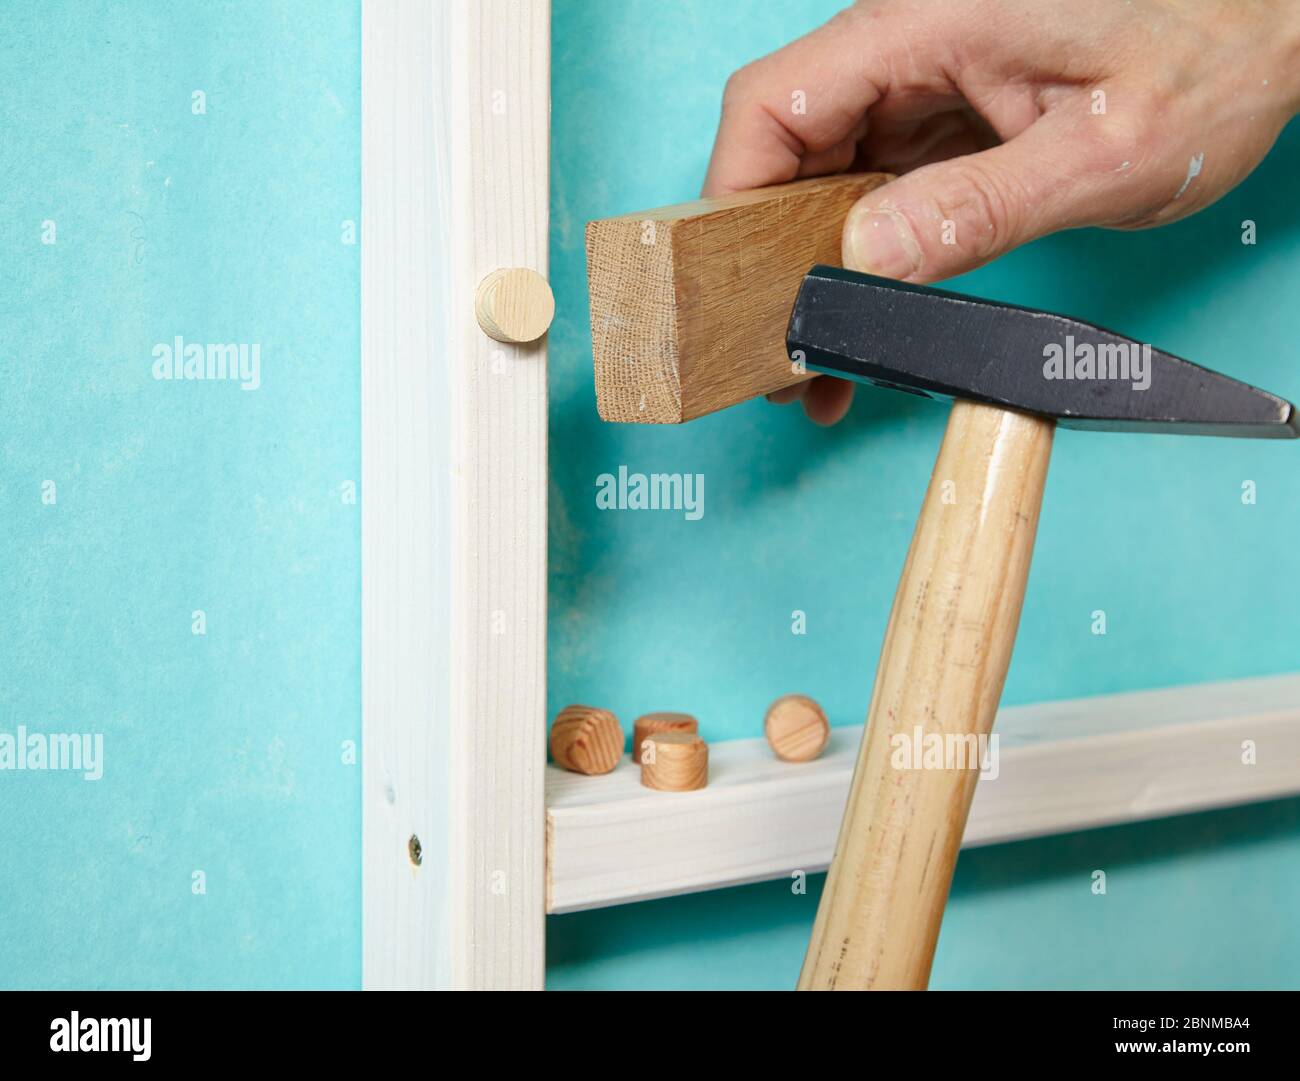 DIY wall design 02, step-by-step do-it-yourself production, various turquoise colored areas separated by white wooden strips, step 14: covering the screw holes with wooden cones, driving in with a wooden block and hammer Stock Photo